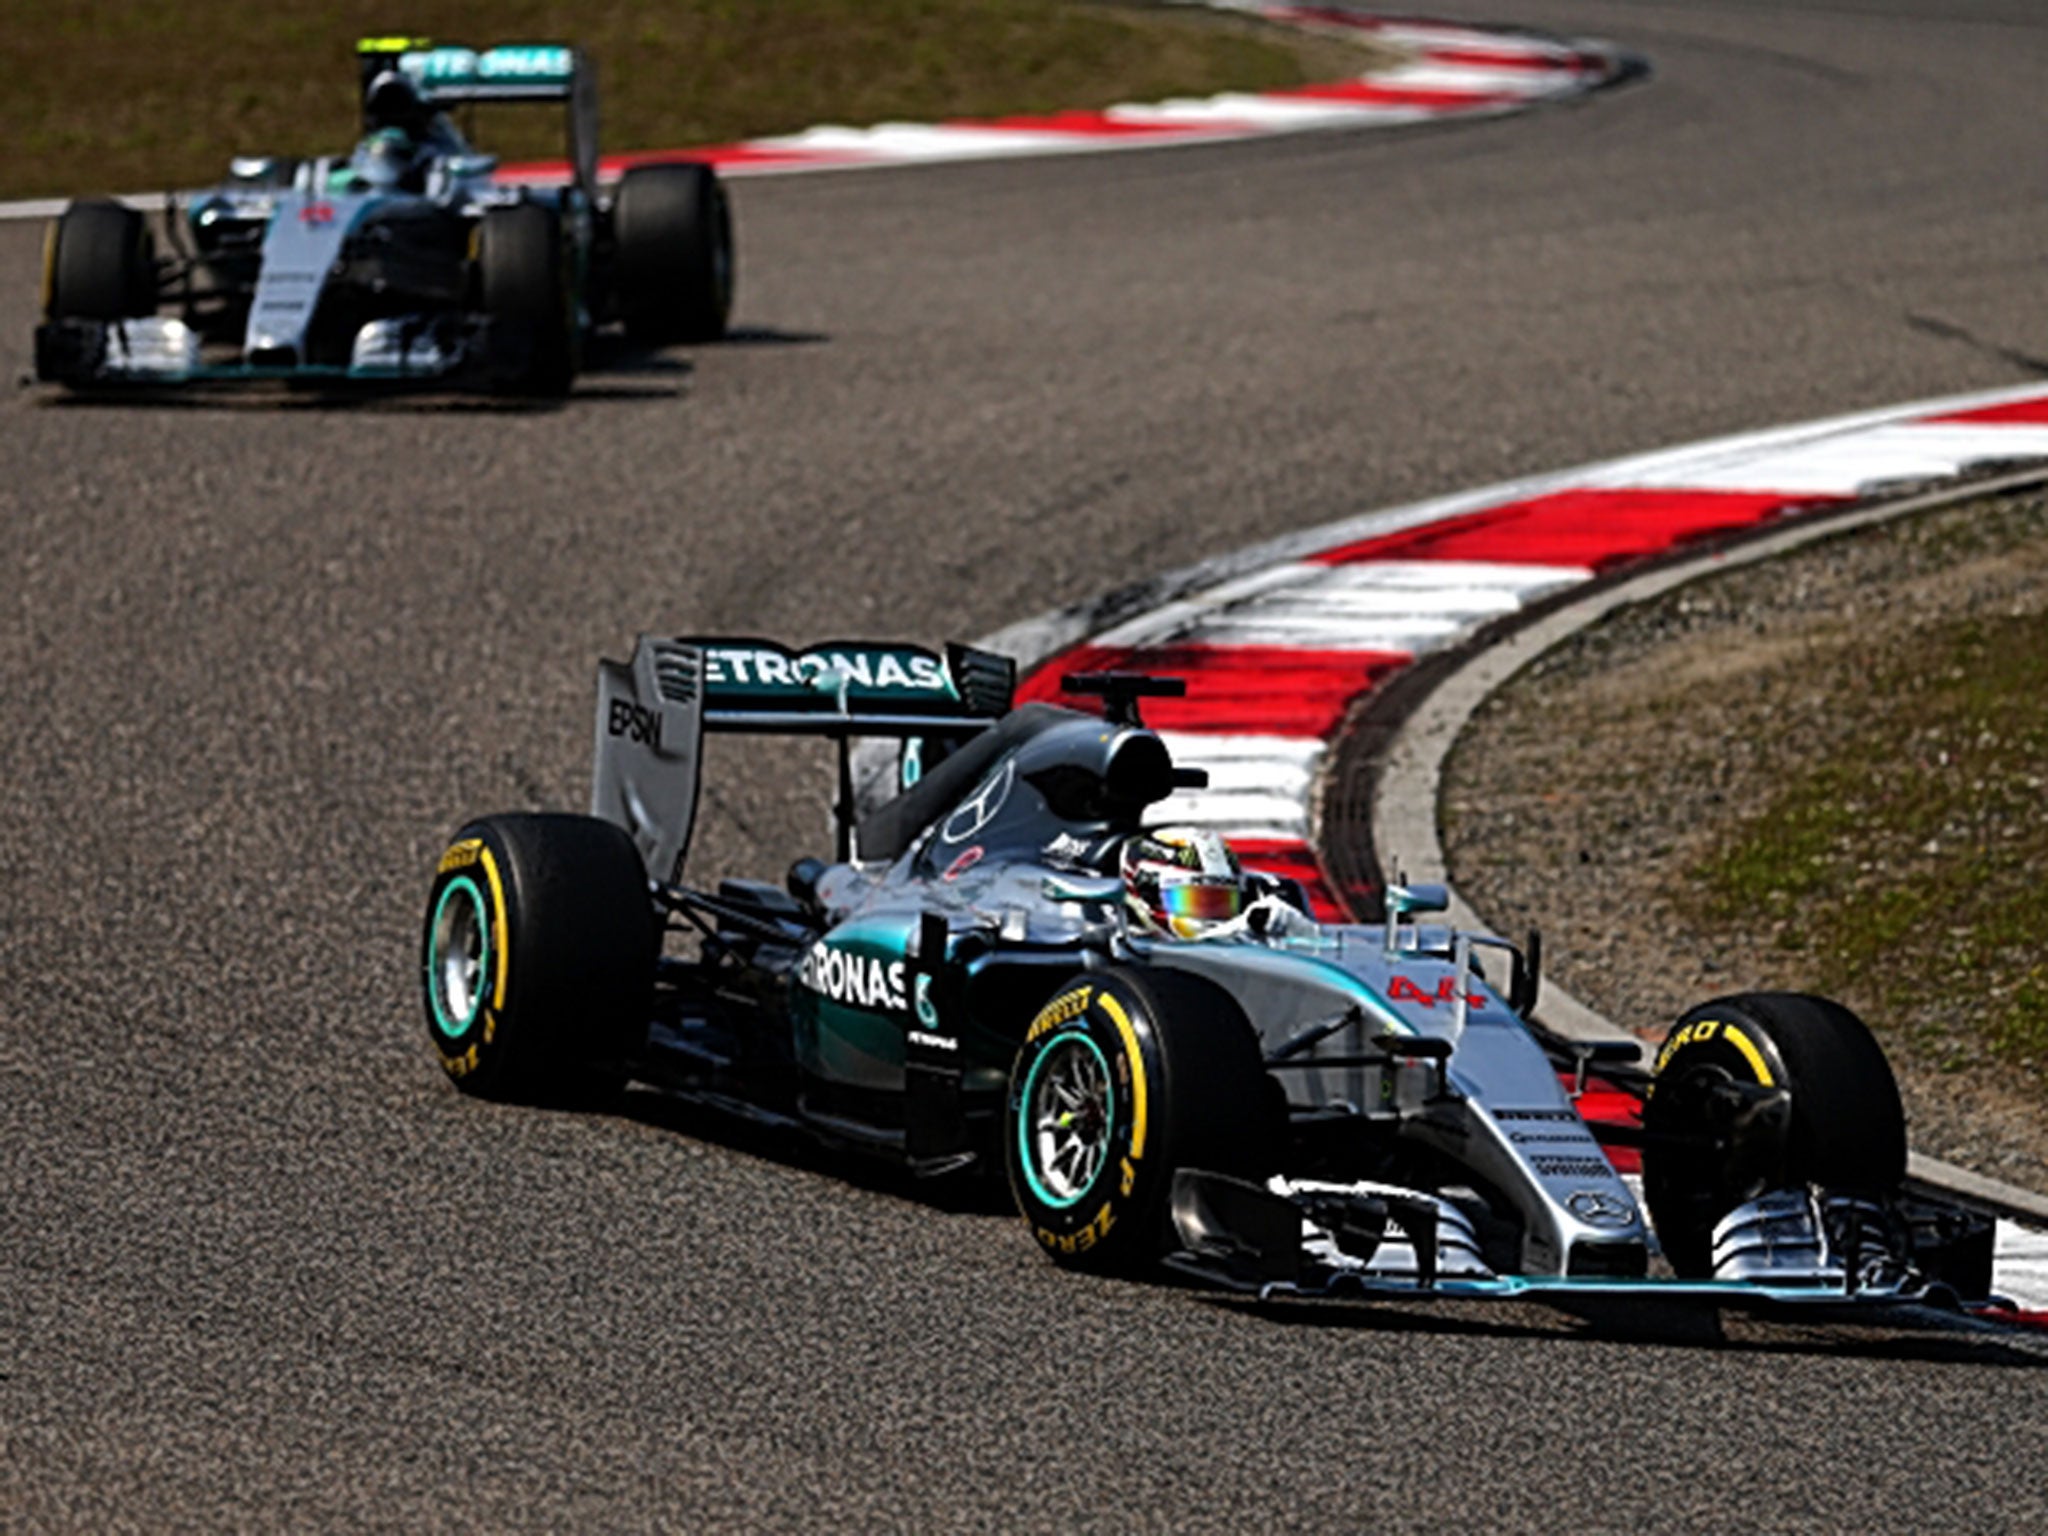 Lewis Hamilton stays just in front of fellow Mercedes driver Nico Rosberg